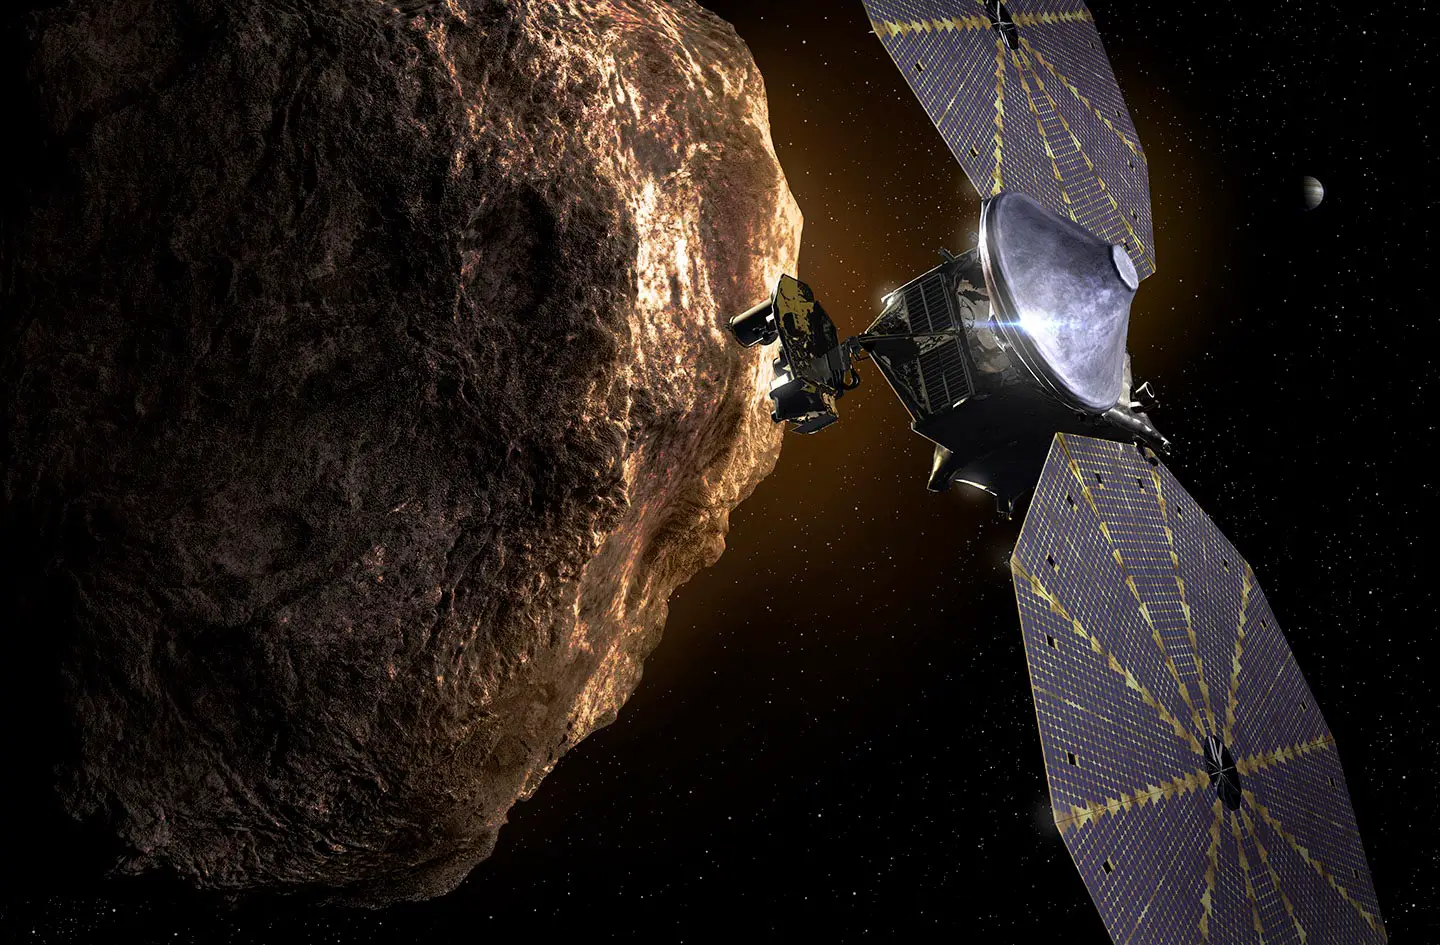 NASA’s Record-Breaking Lucy Spacecraft Has a New Asteroid Target